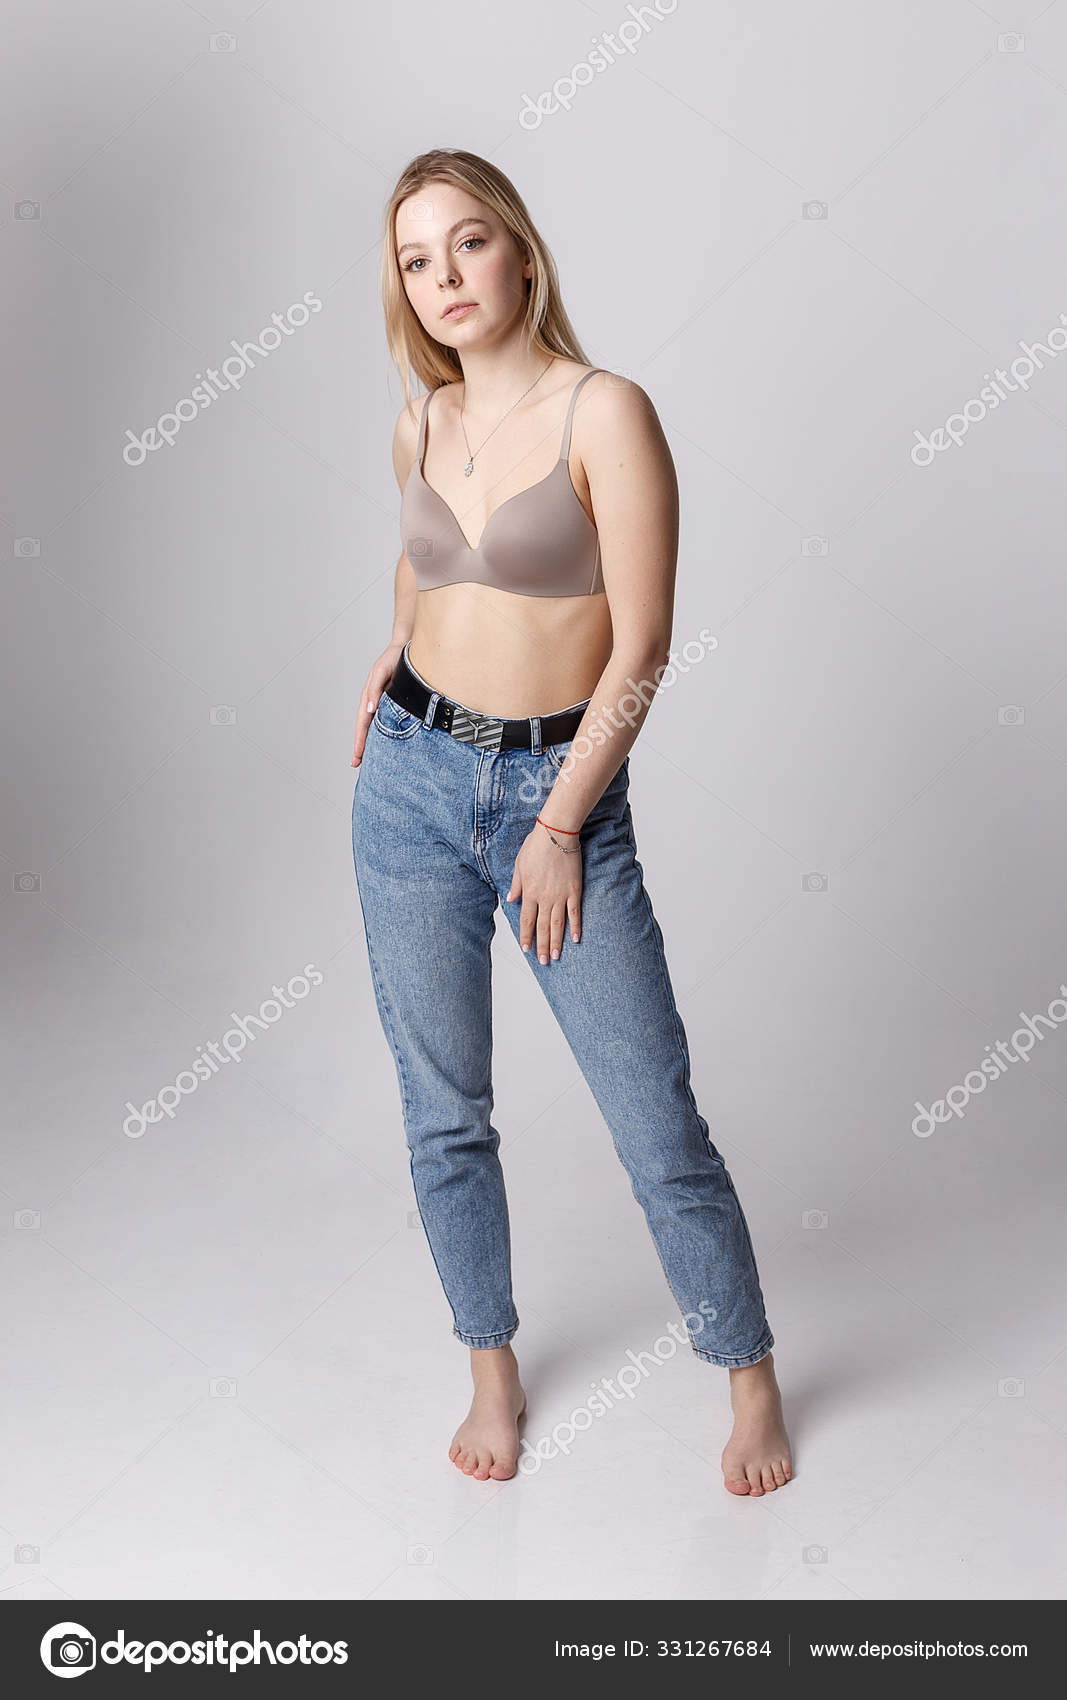 Young caucasian woman posing in blue bra and jeans stock photo